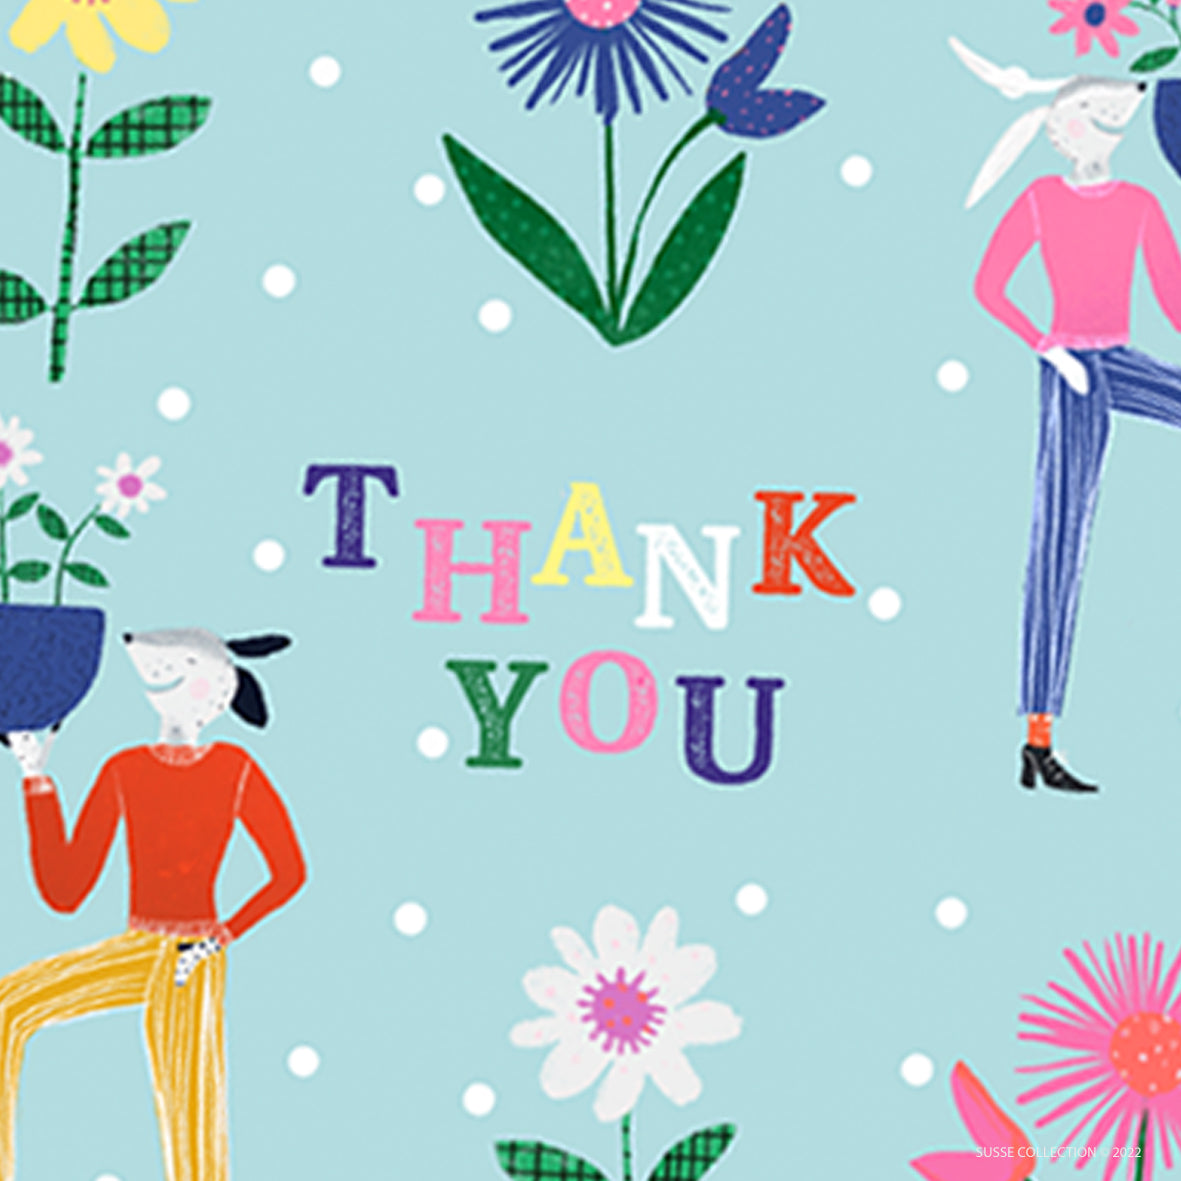 thank-you-card -Pack -of -10 Square Folded -Cards- illustrated - by -Susse -Linton-detail